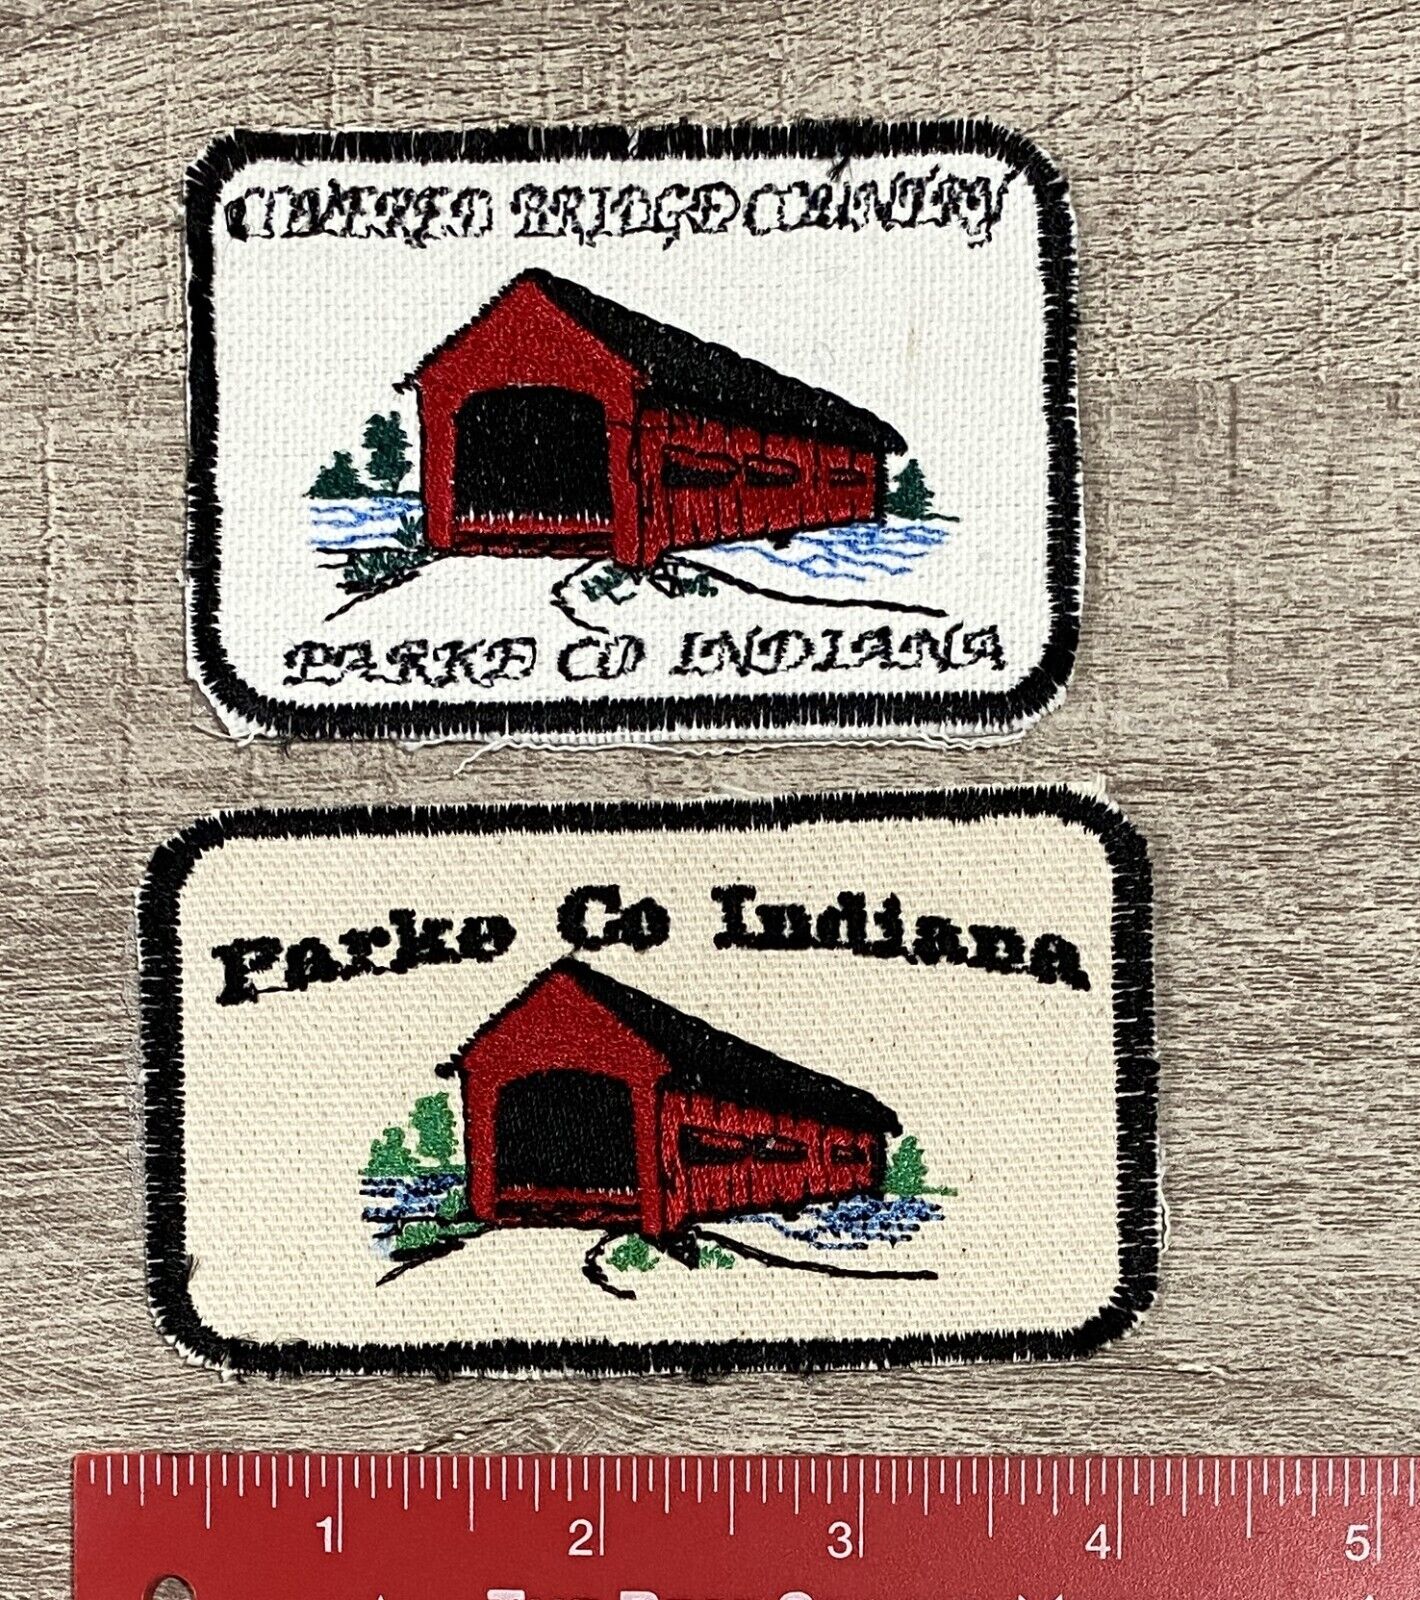 2 Parke County Indiana Covered Bridge Patches